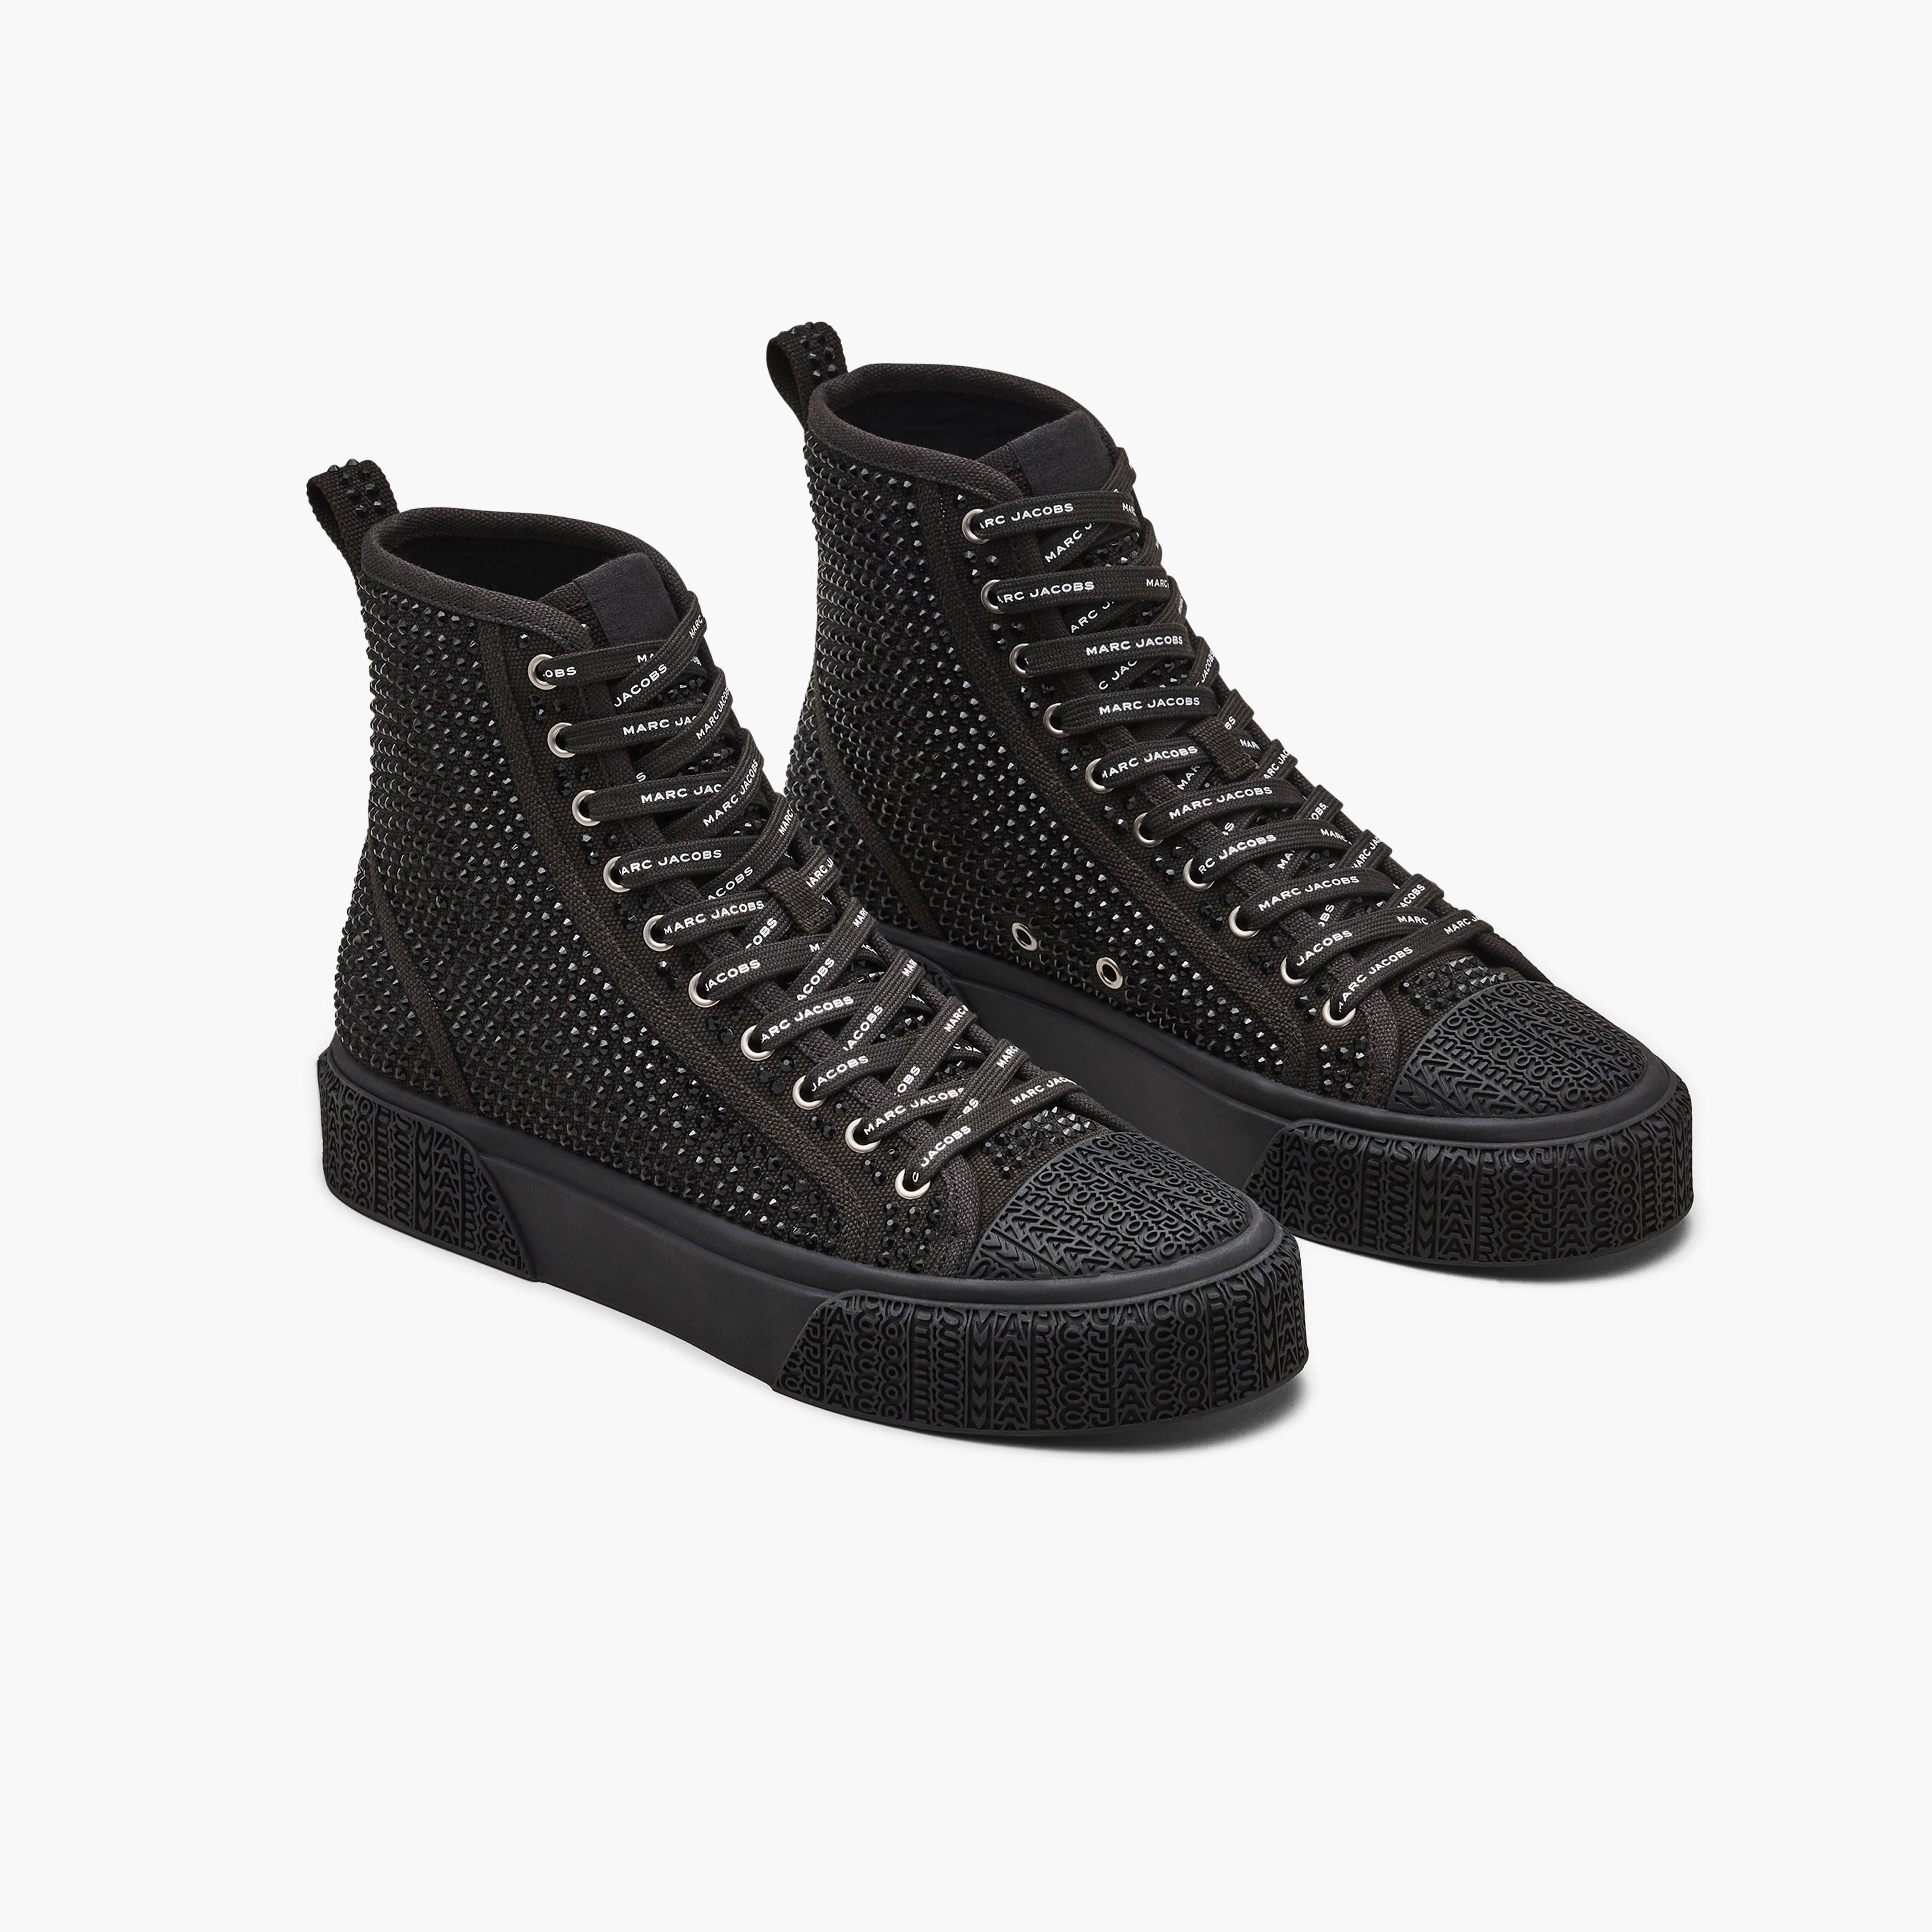 Marc by Marc jacobs The Crystal Canvas High Top Sneaker,BLACK Crystal